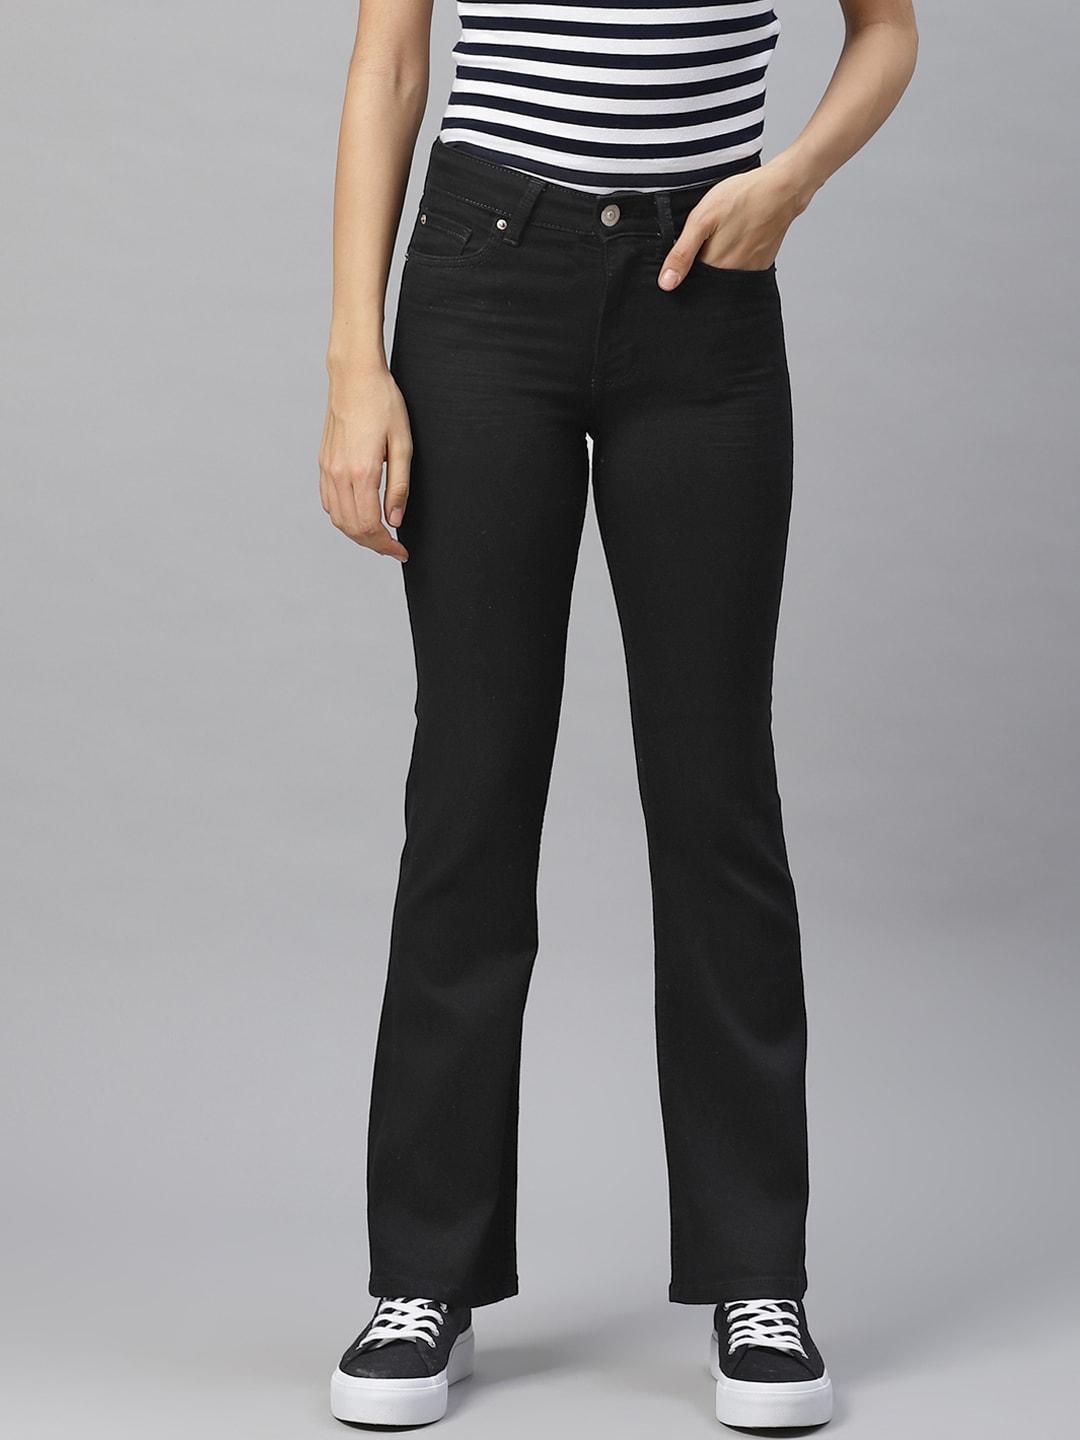 marks & spencer women black the eva bootcut mid-rise clean look stretchable jeans